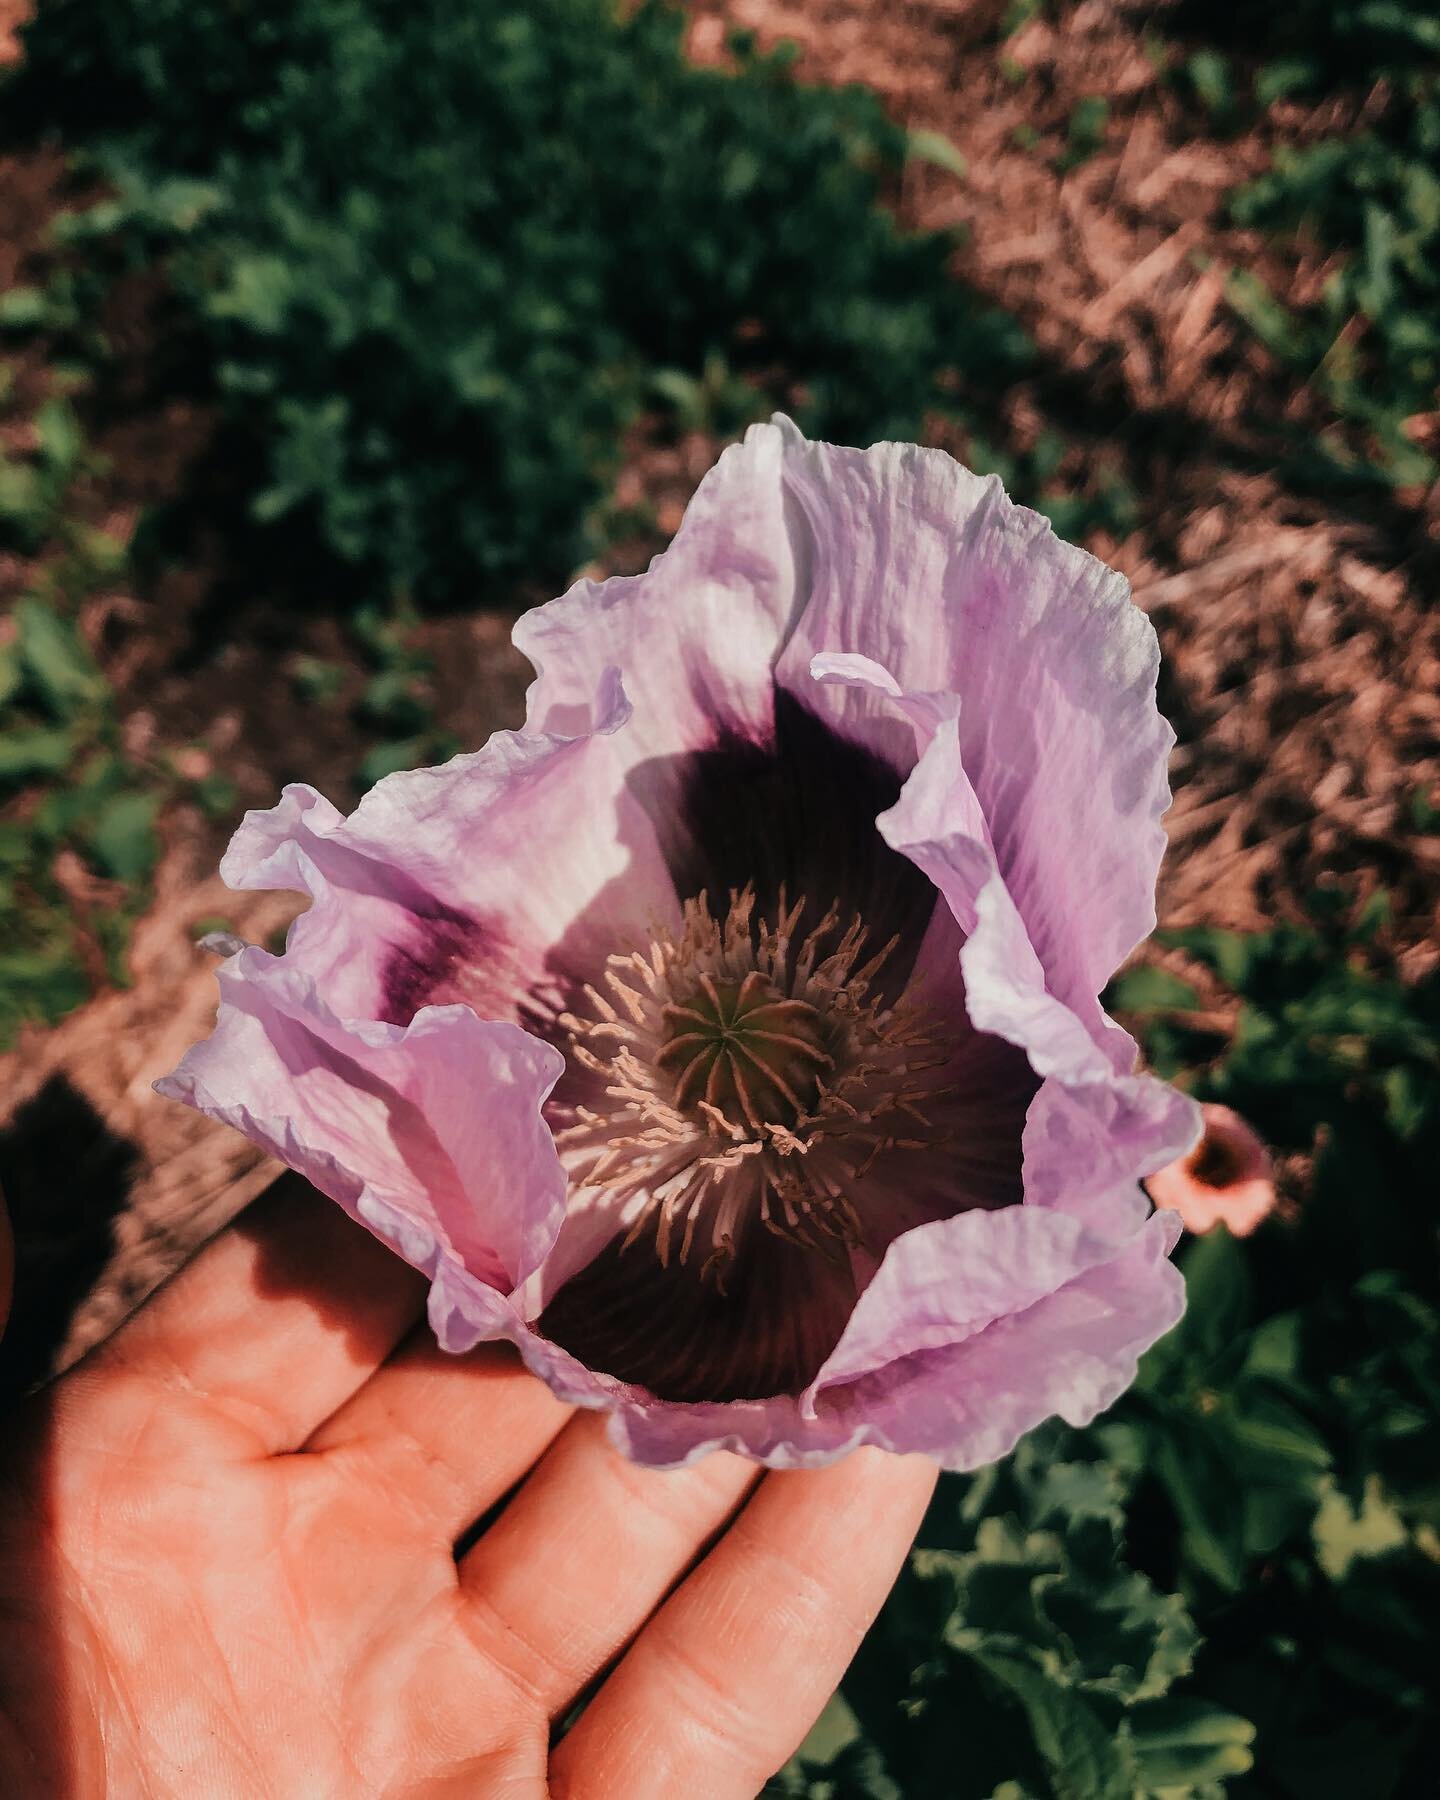 papaver somniferum - a plant medicine I am all too familiar with at least in its synthetic forms not so much in plant form. 

I will admit there is some fear I hold surrounding growing this powerful plant medicine. 

A fear I&rsquo;m letting go of as